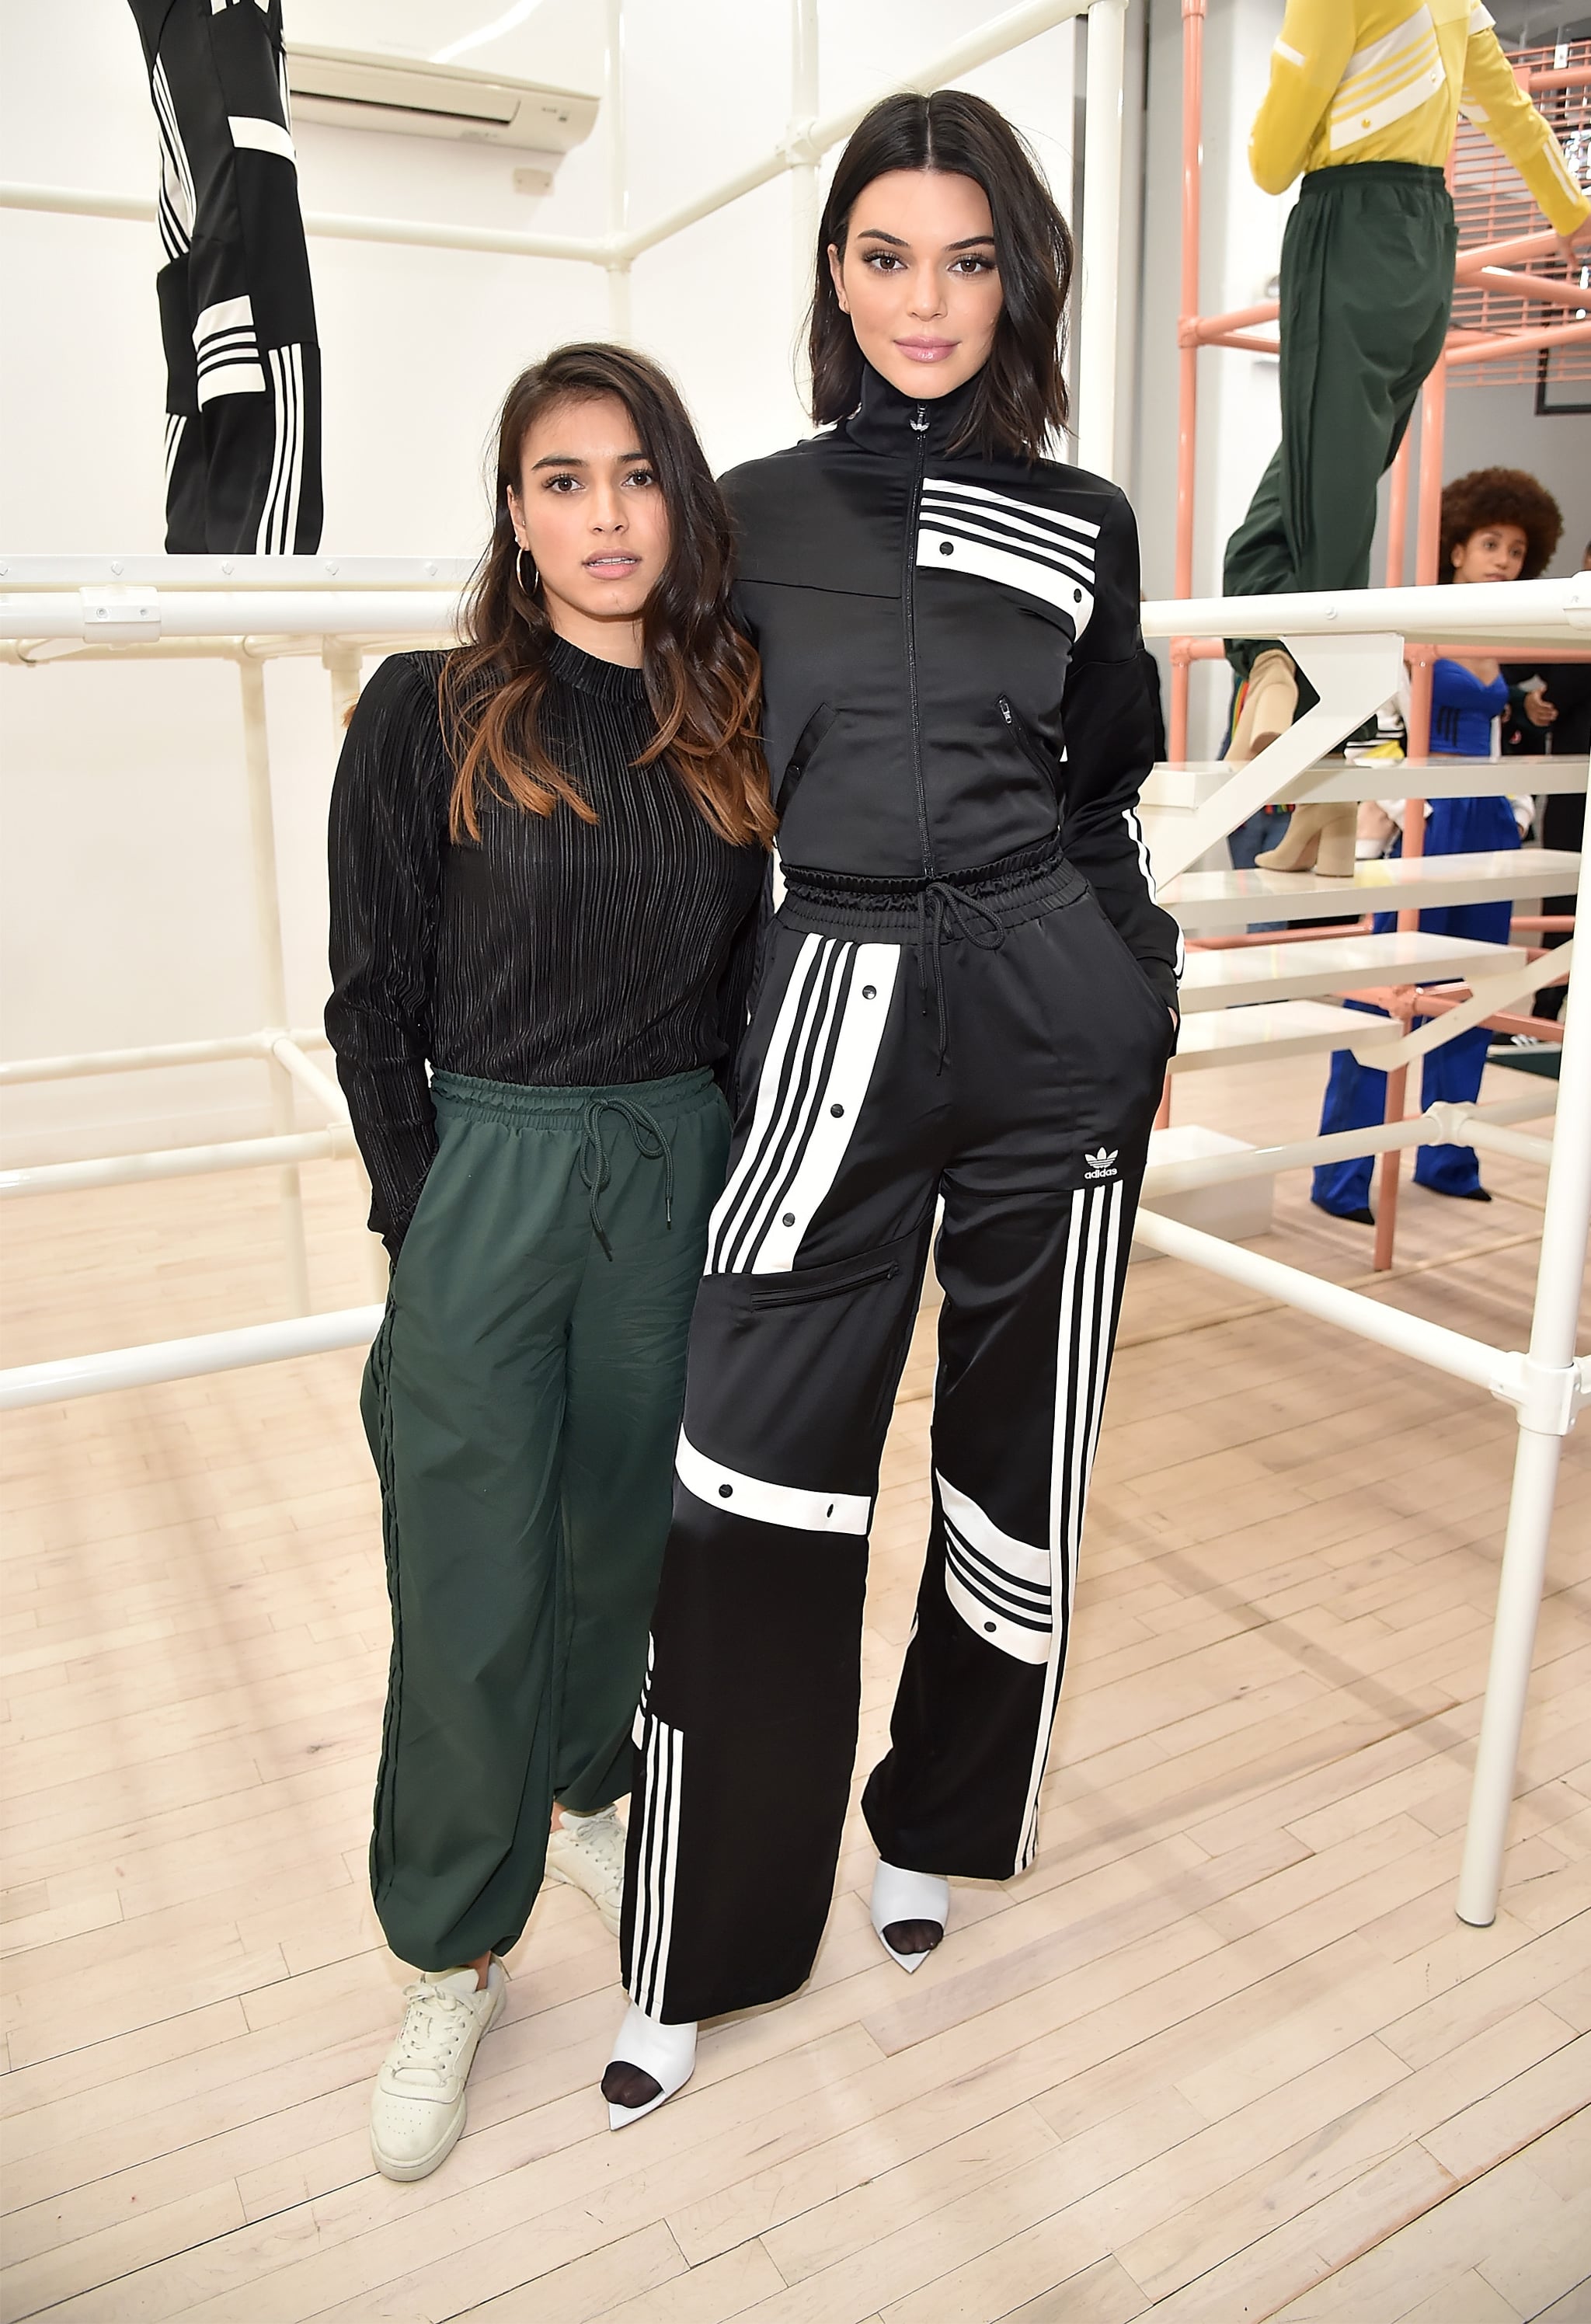 Kendall attended the Adidas presentation, celebrating designer Jenner's New York Fashion Week Has All About Parties | POPSUGAR Fashion Photo 6